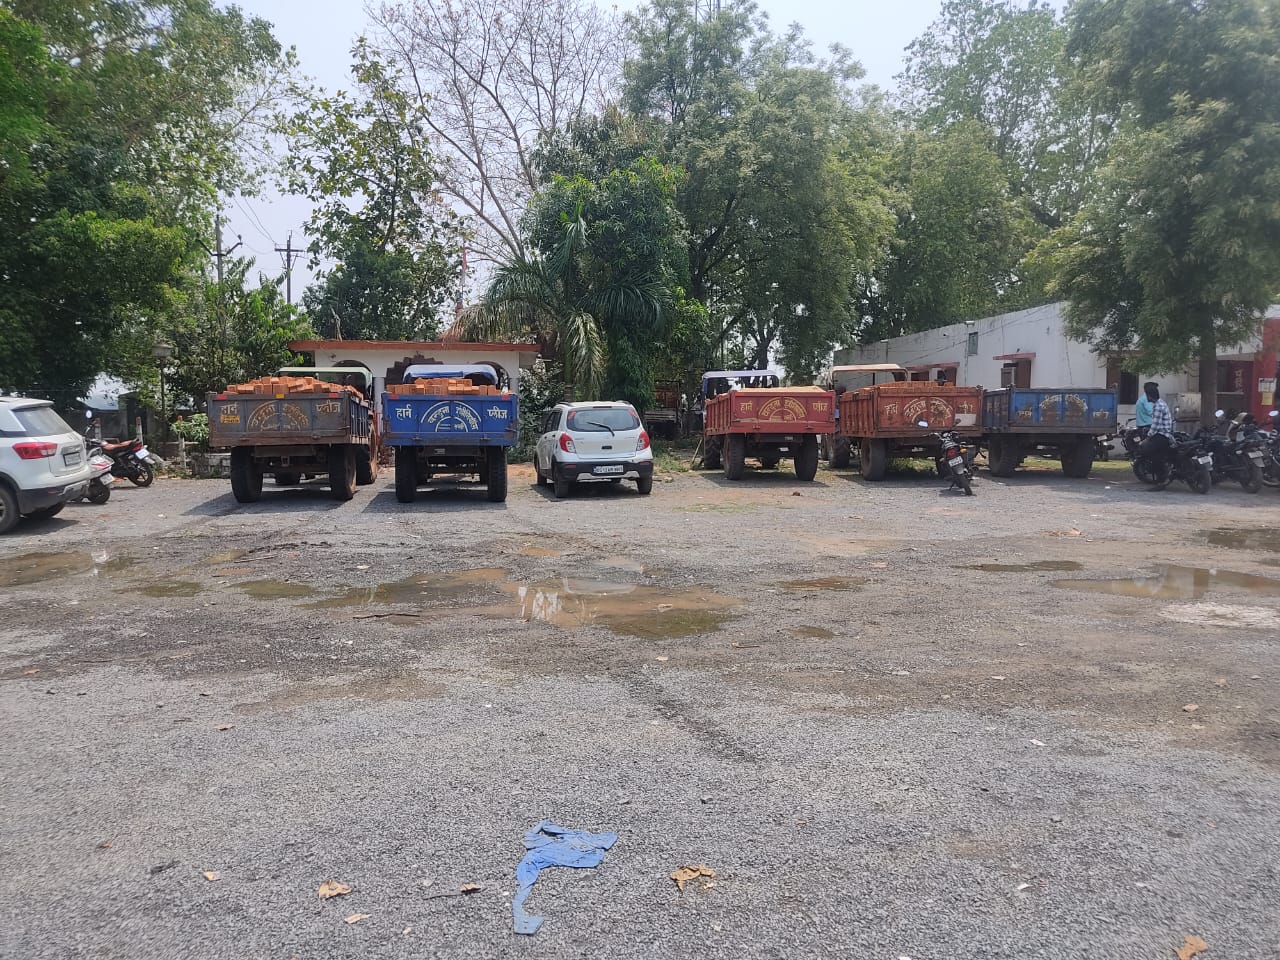 6 vehicles seized for illegal transportation and excavation